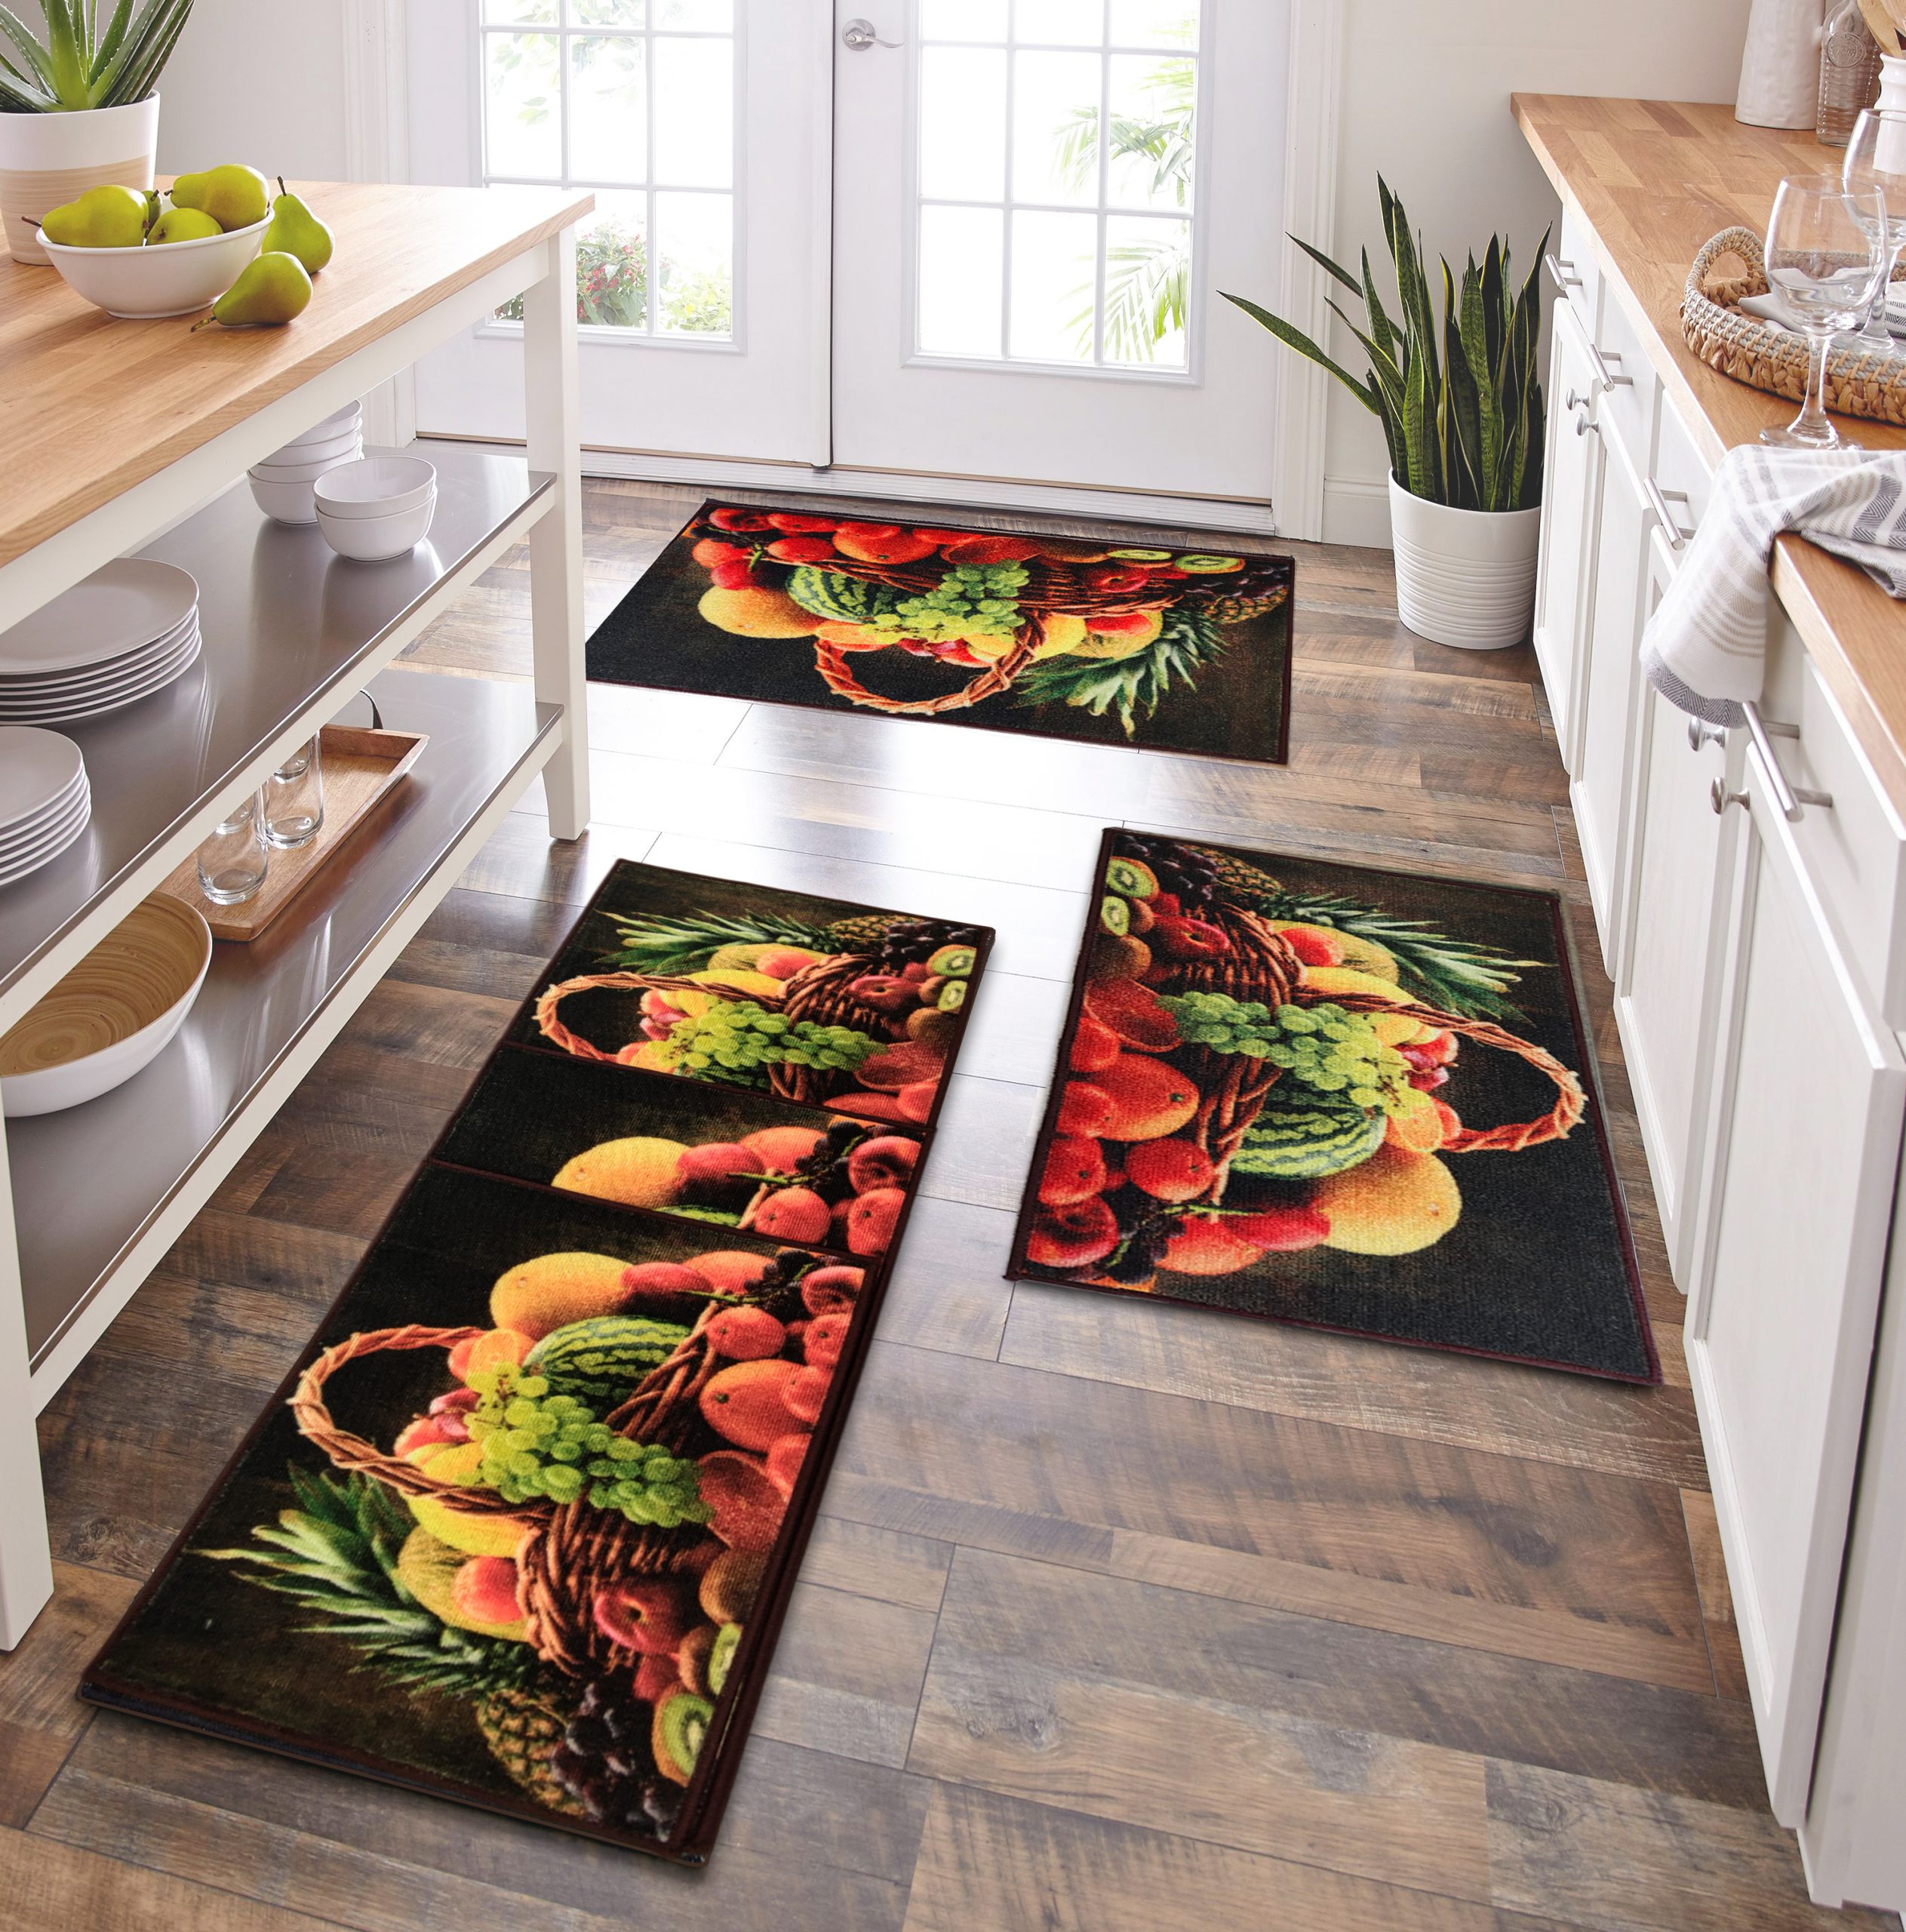 Home Trend 3PC Kitchen Mat Set-Fruit Basket - Solomon Yufe and Company  Limited